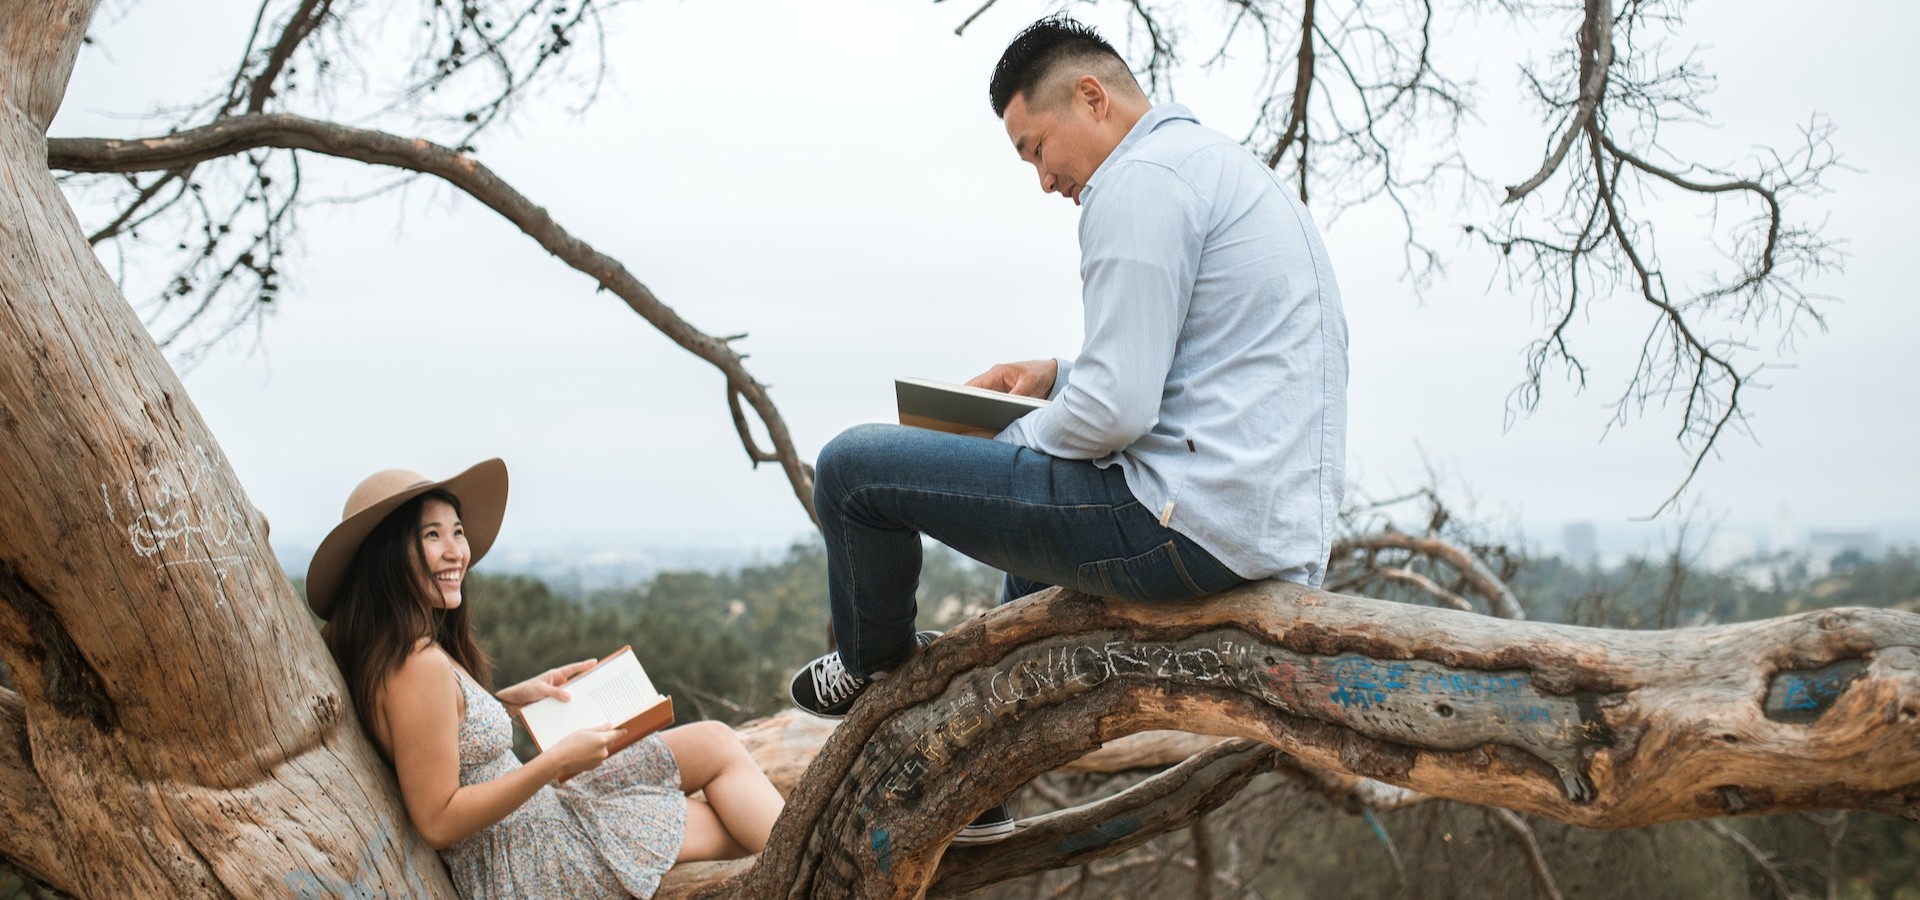 Couple reads about informed consent together in nature.